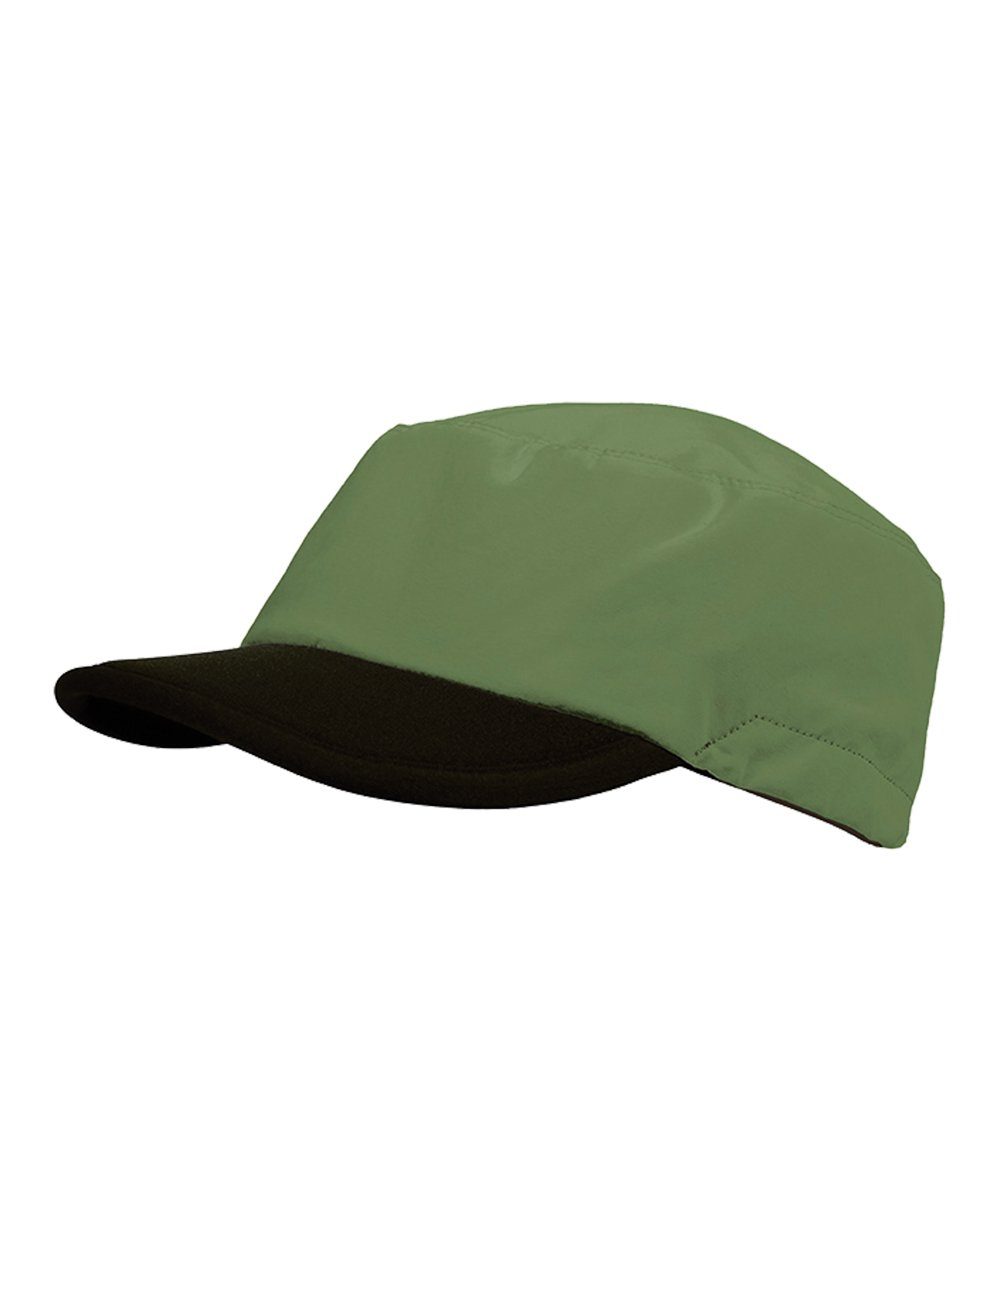 CAPO Army Cap CAPO-LIGHT MILITARY spinach CAP Europe Made Made Europe in in